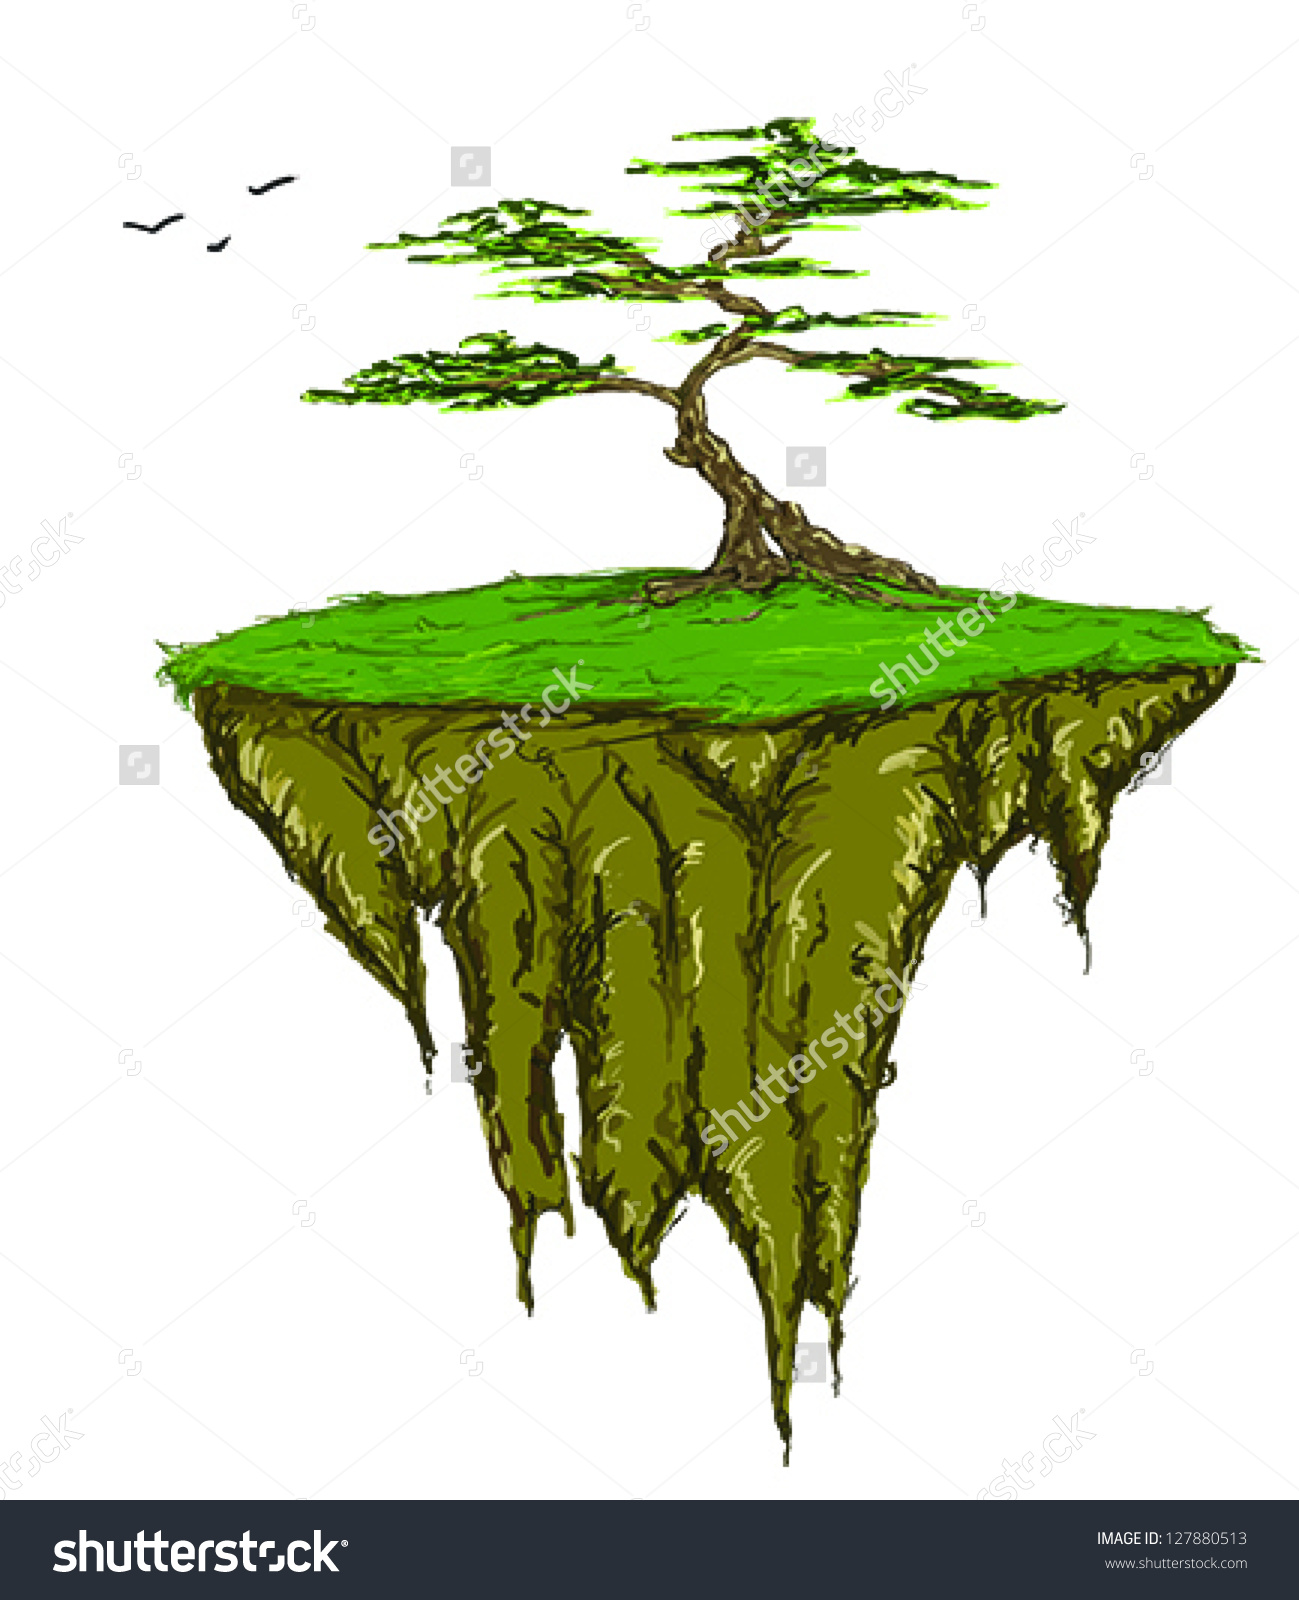 Floating Island clipart #12, Download drawings